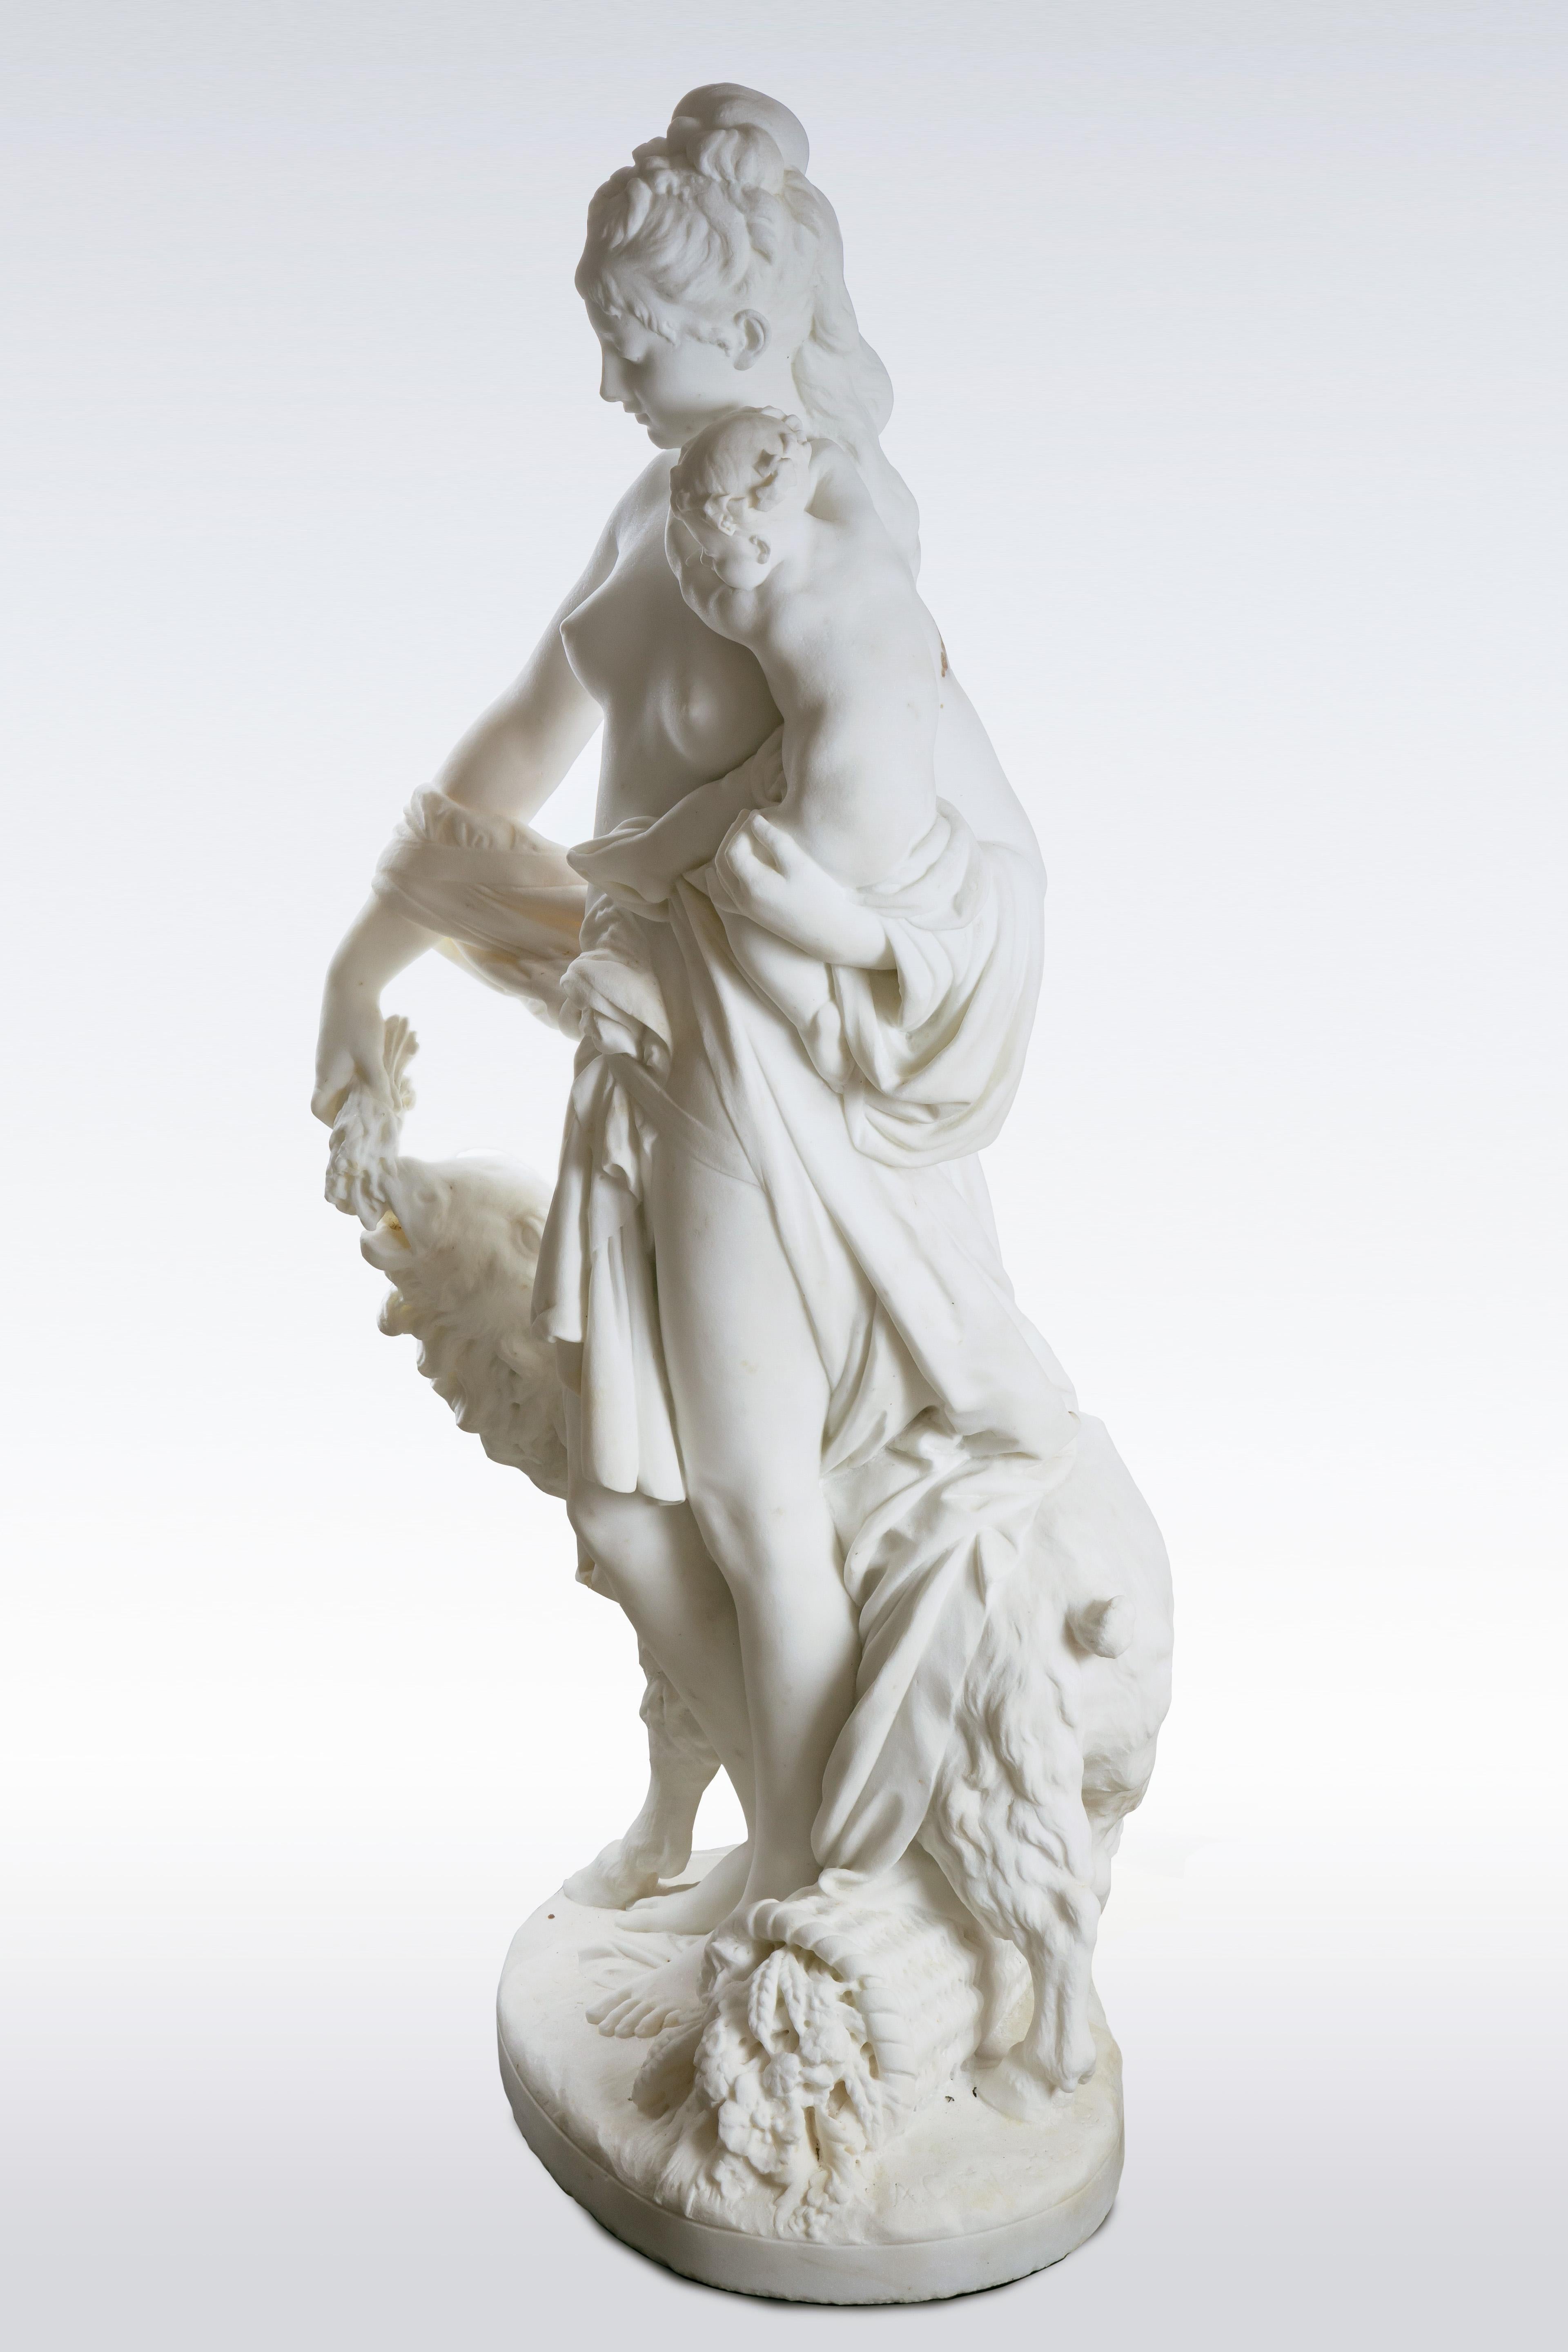 Le Retour des Champs ‘Return from the Harvest’ Carrara Marble, Signed and Dated 9